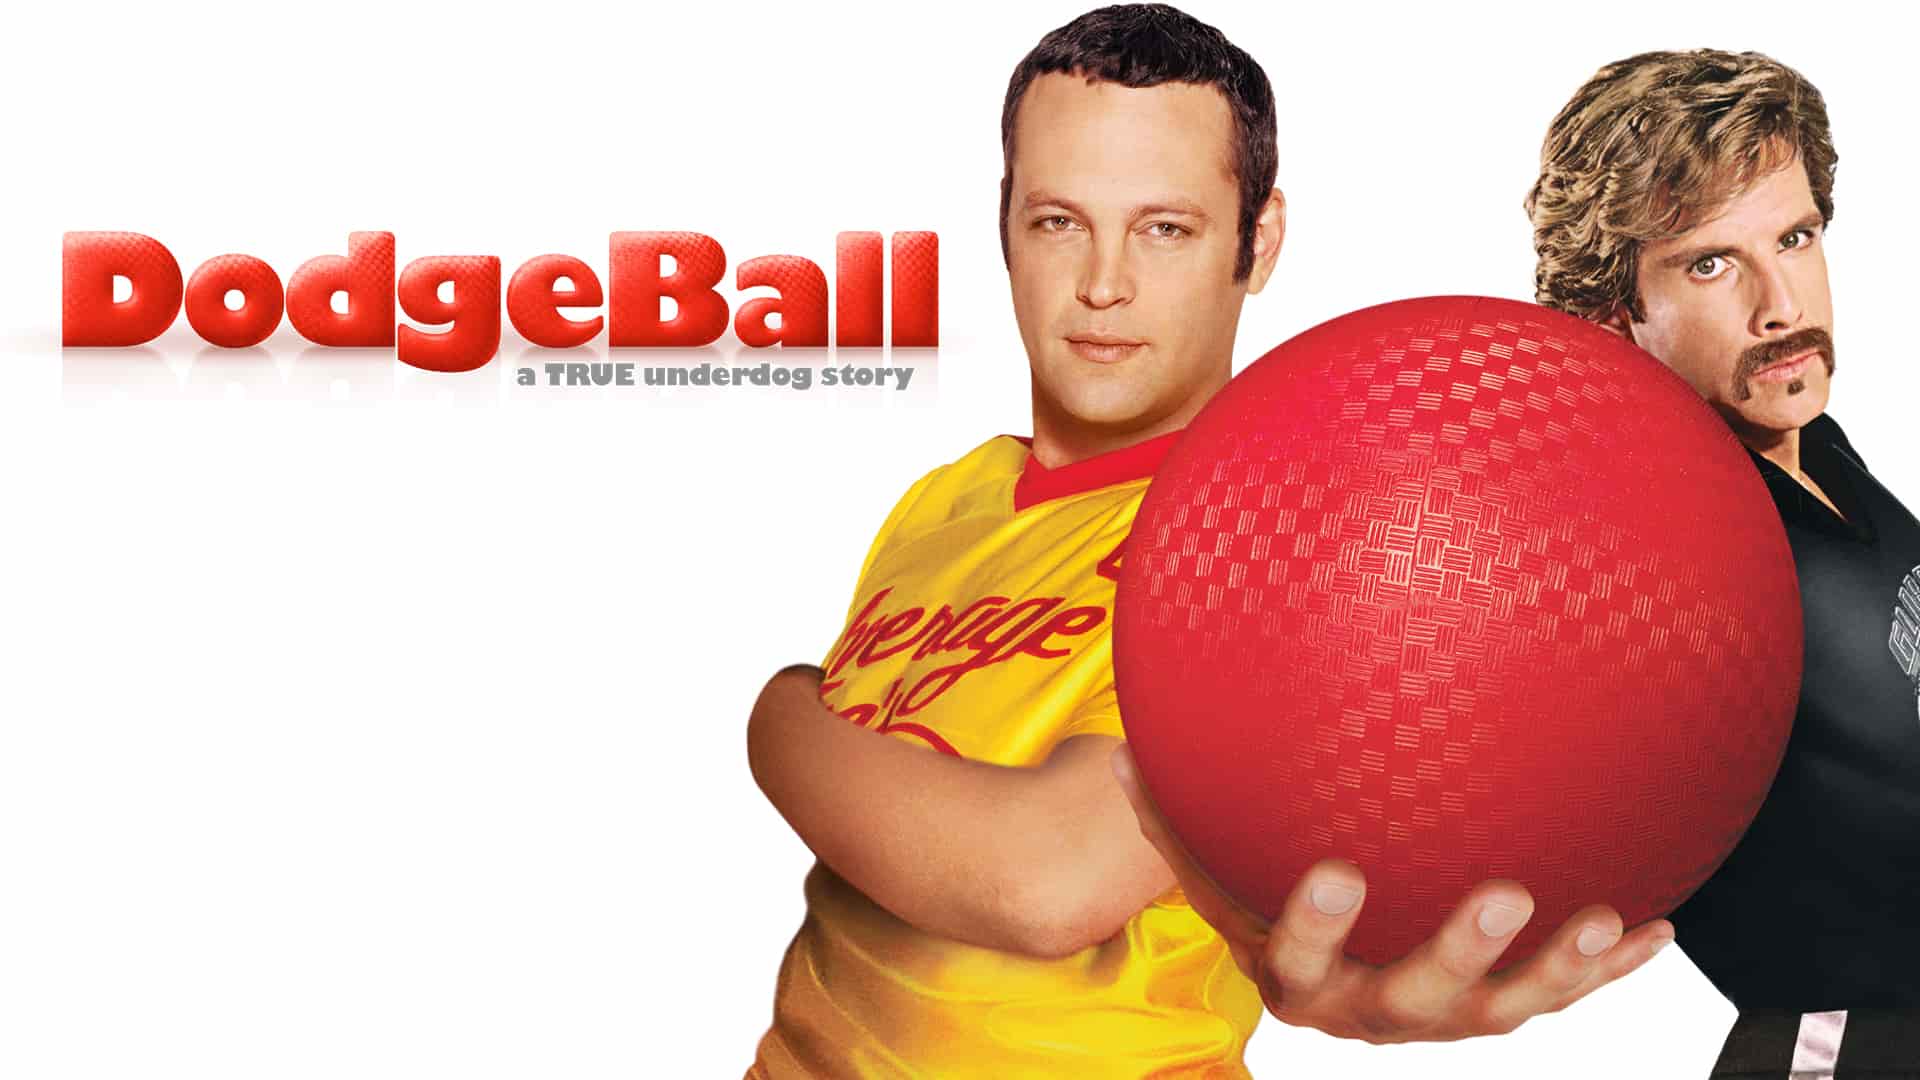 Title art for comedy movie DodgeBall